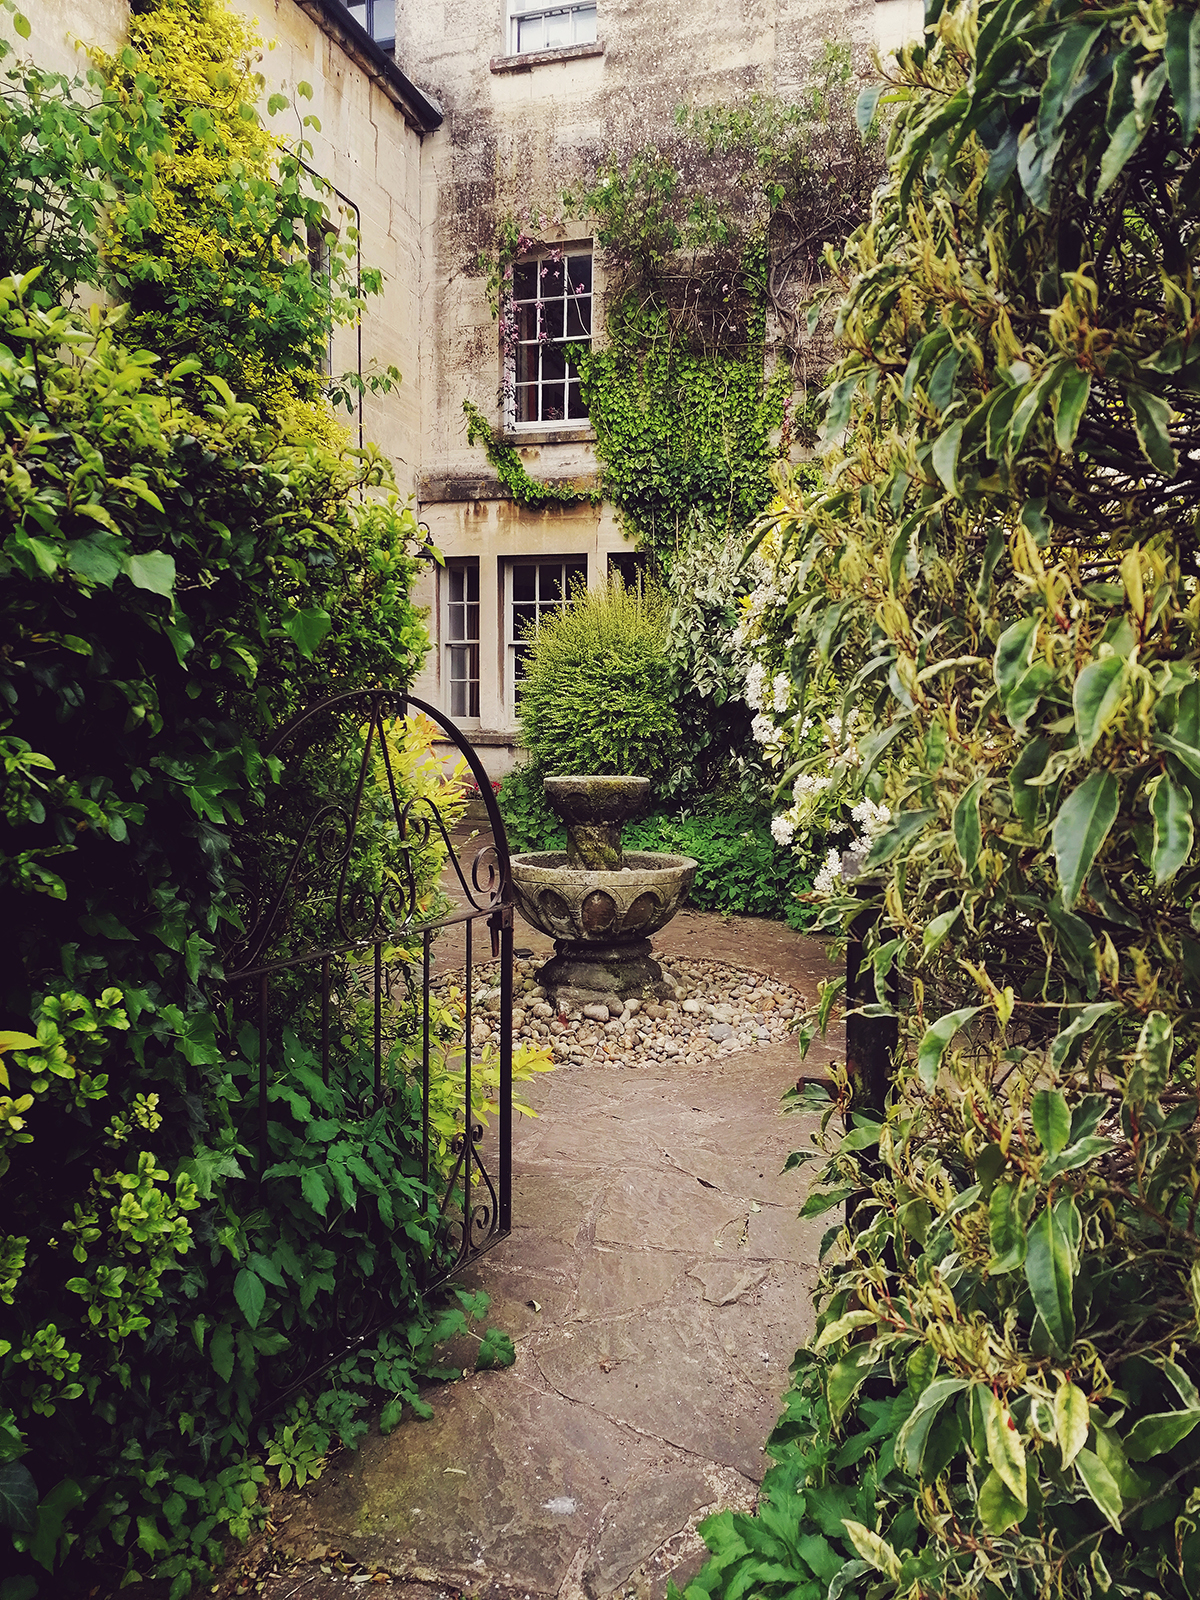 Garden in Painswick, Cotswolds